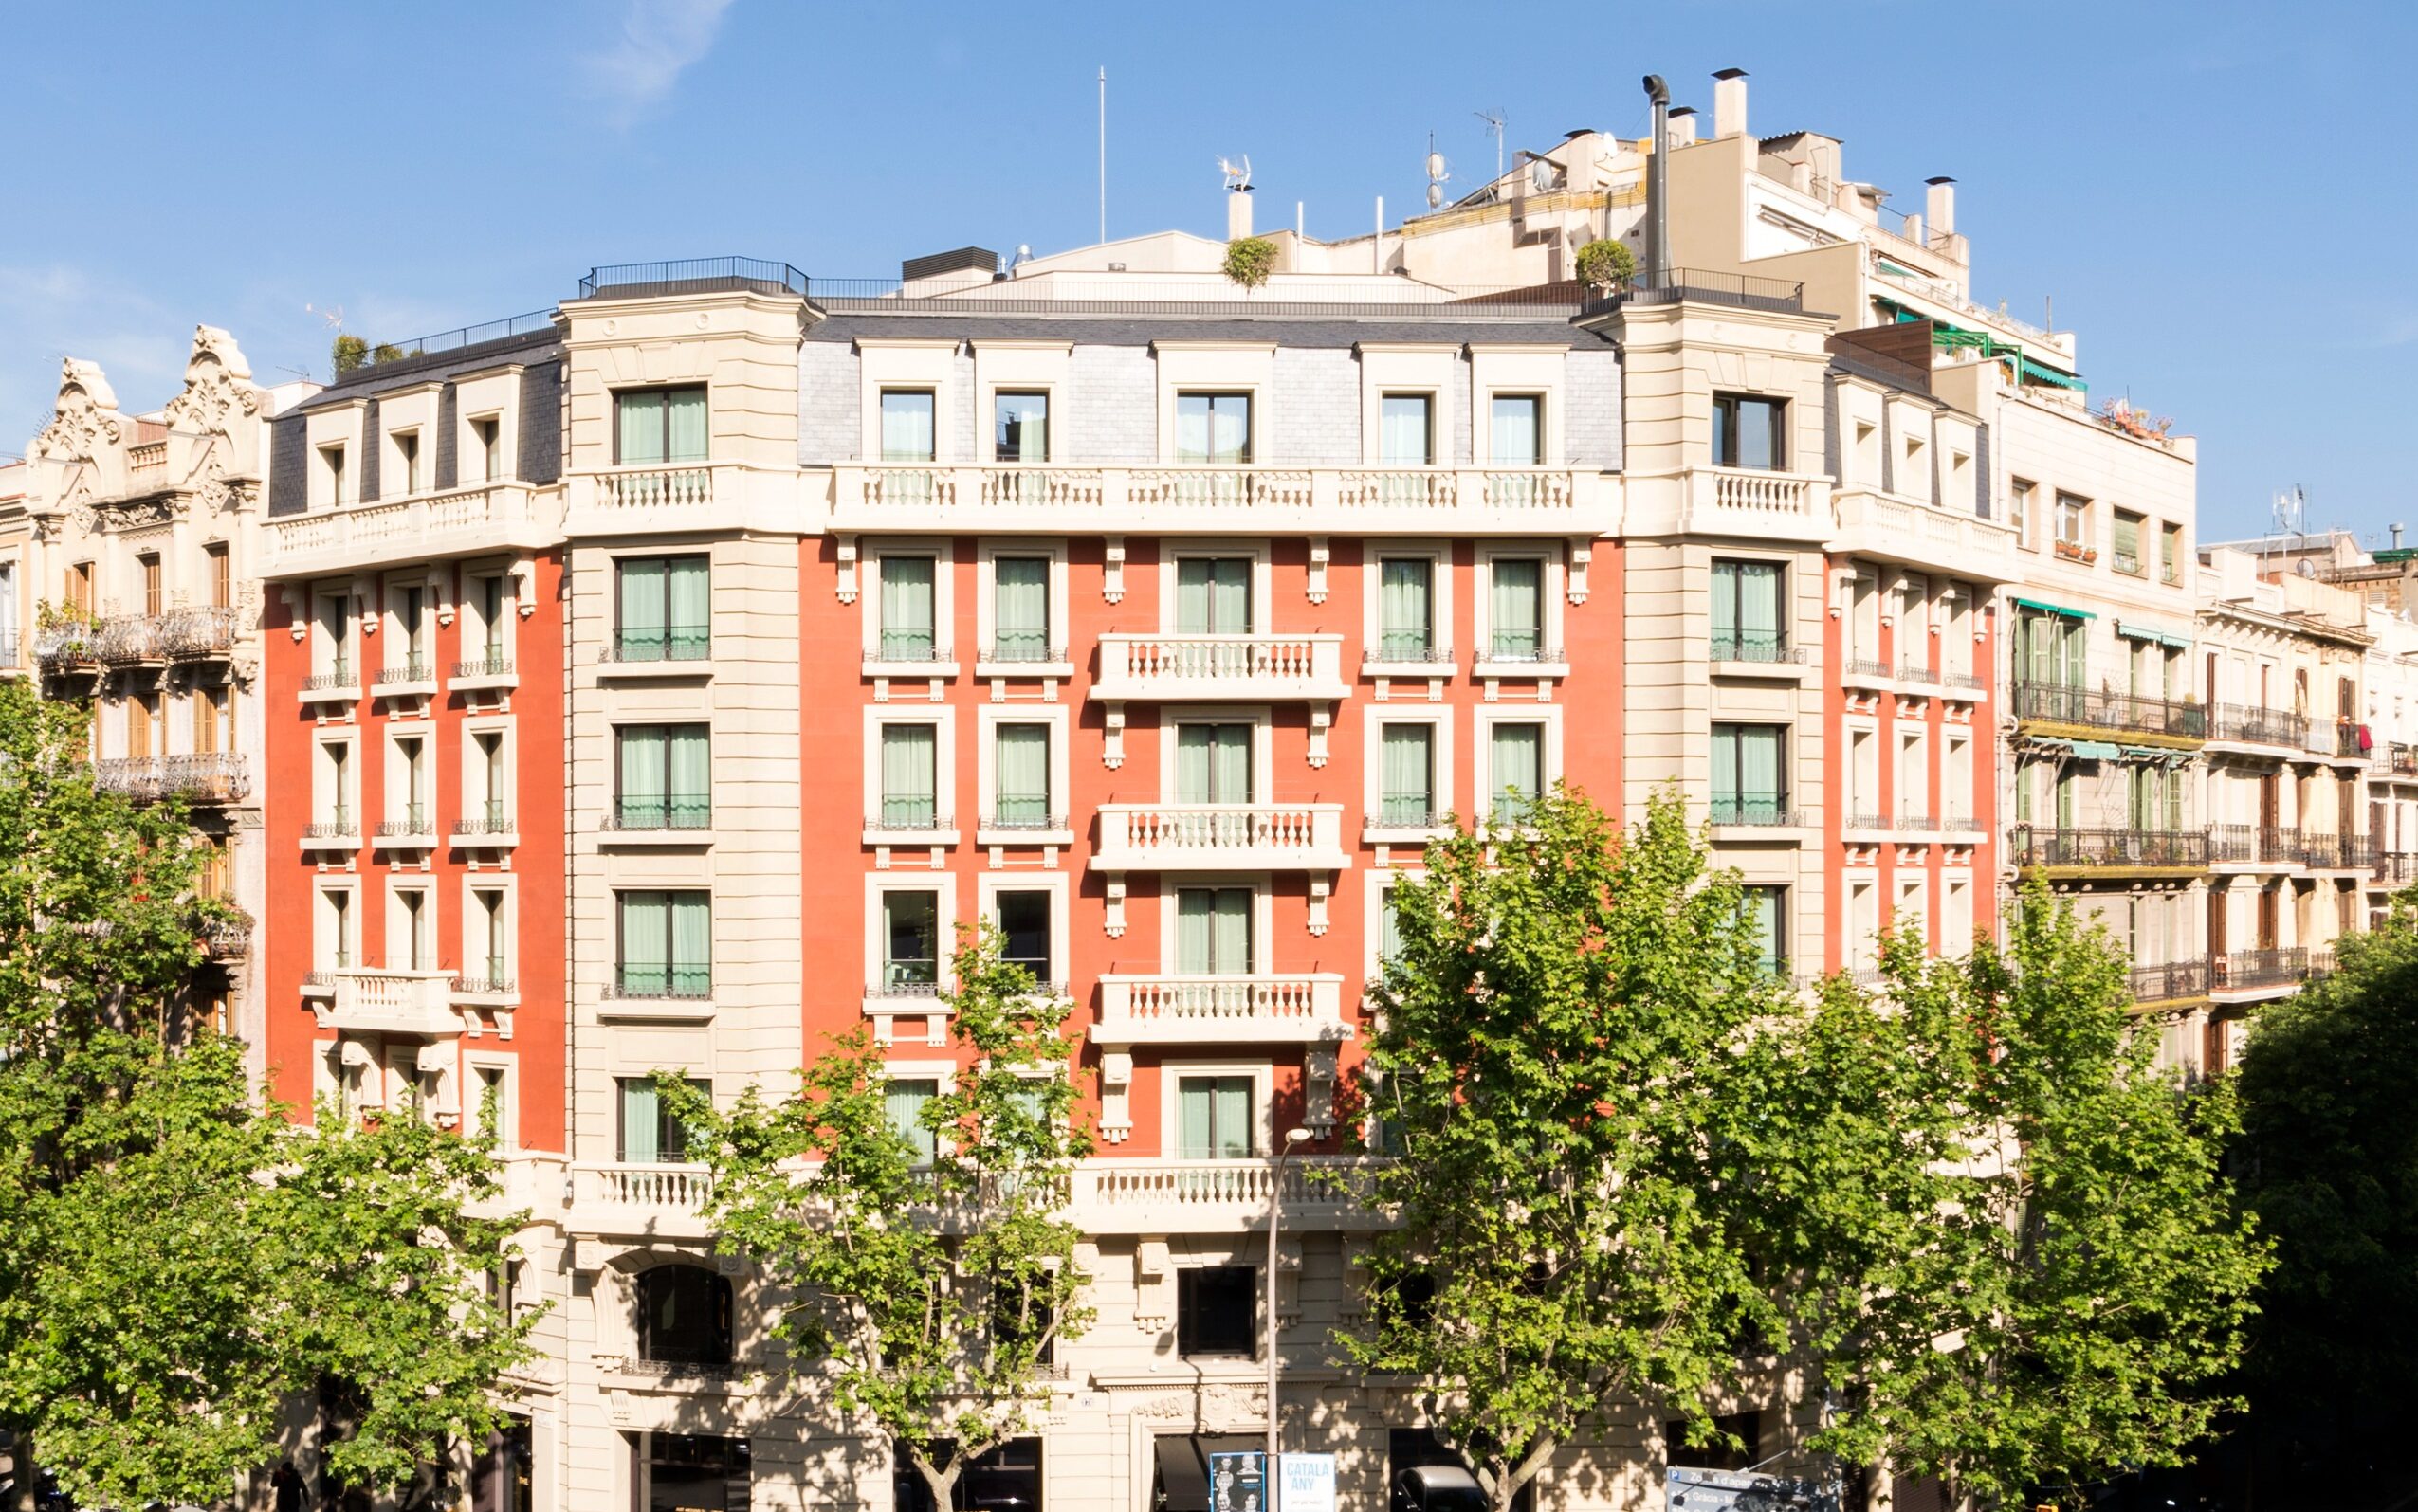 Discover The Most Charming Hotel in Barcelona’s Storied Eixample District